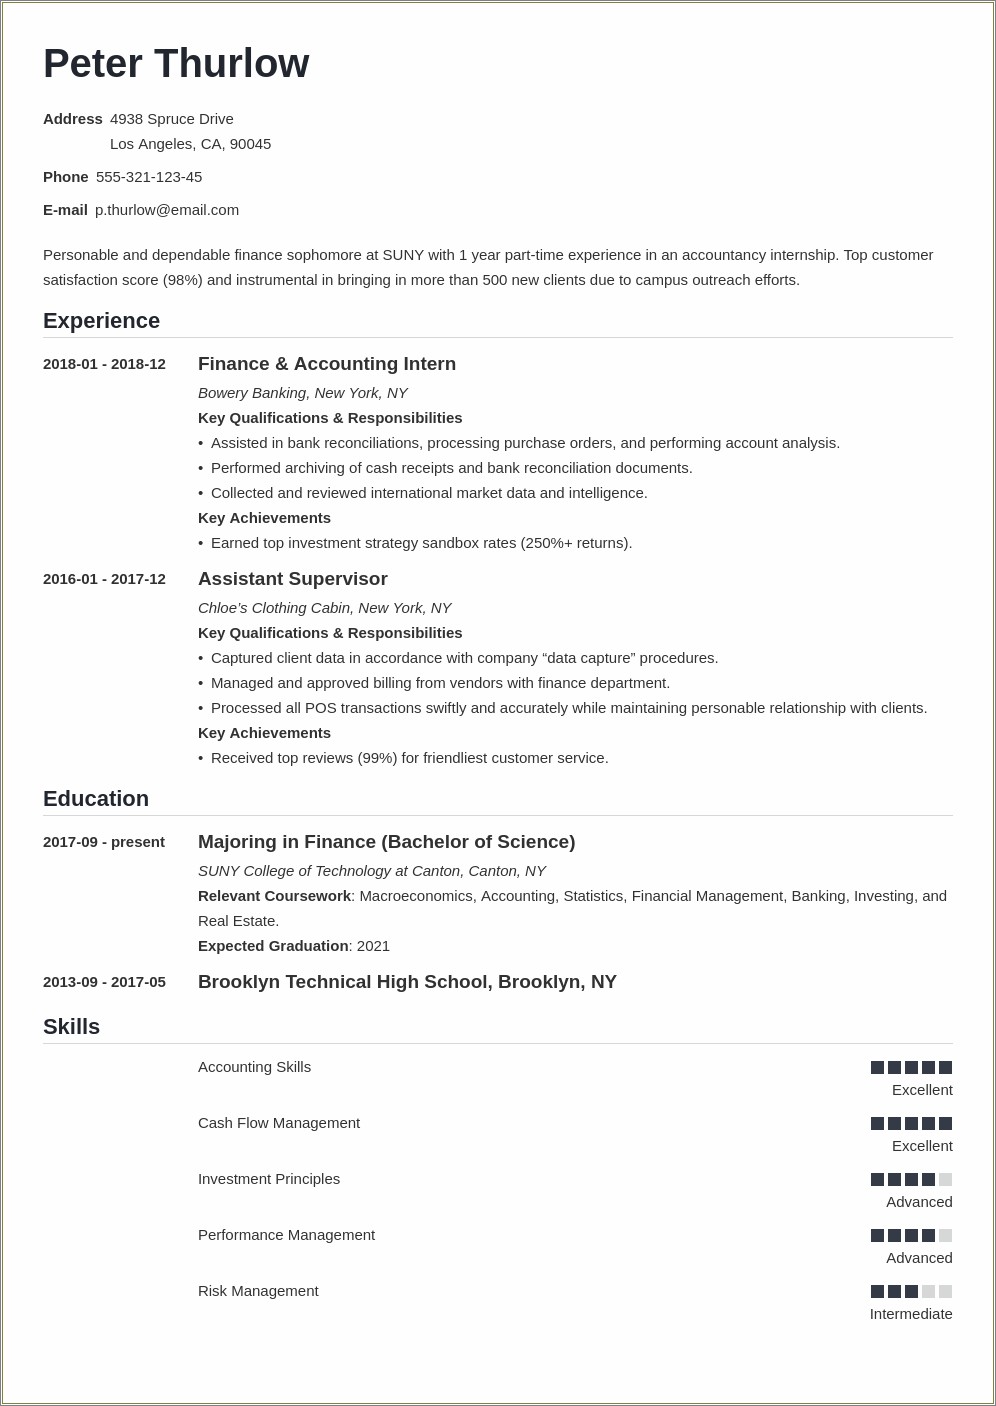 Resume For College Student With Work Experience